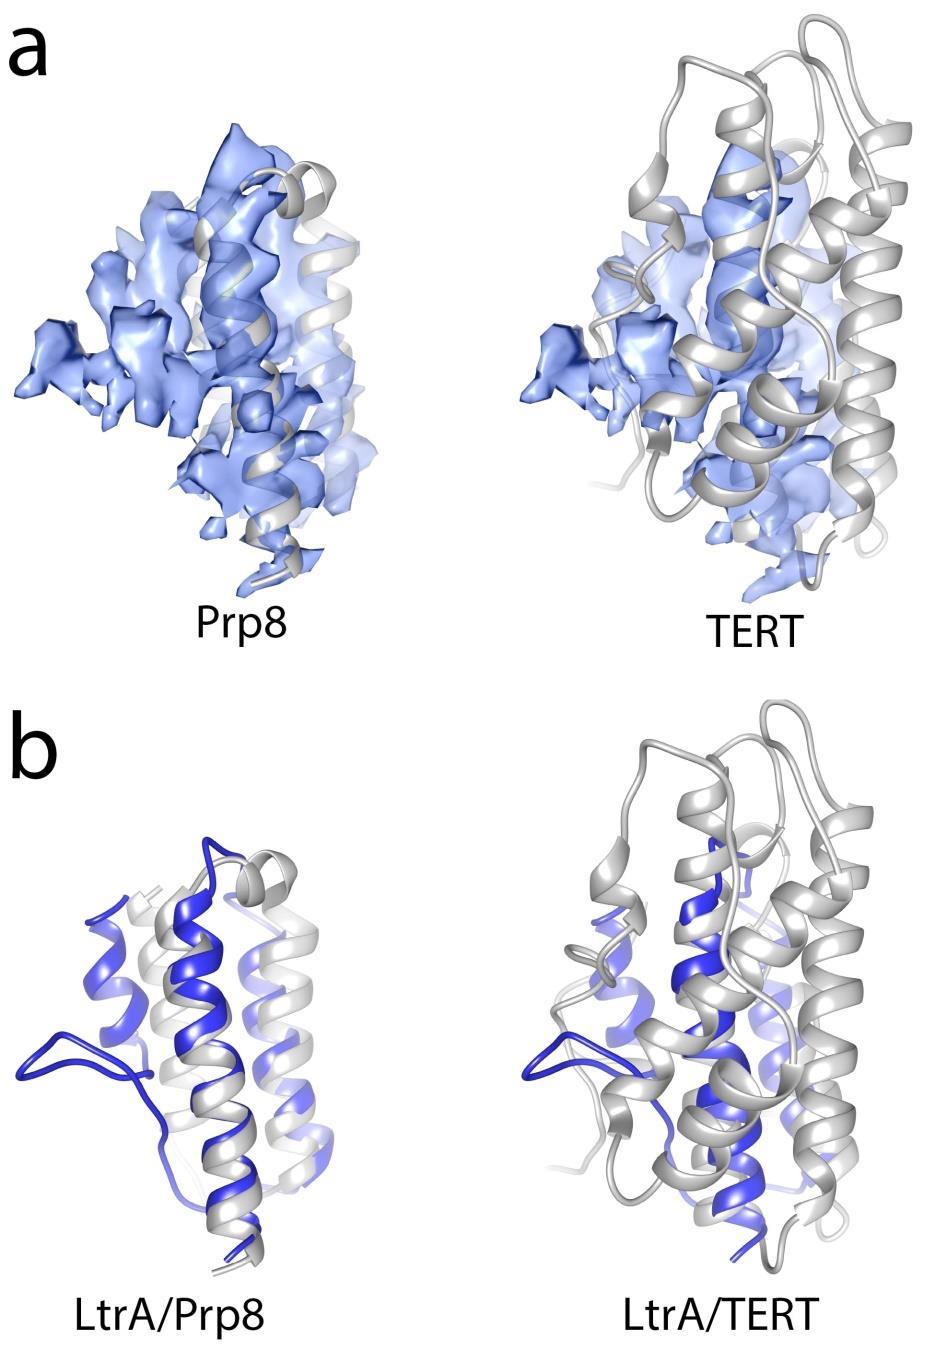 Supplementary Figure 8 Comparison of the thumb domain of LtrA with those of Prp8 and TERT.